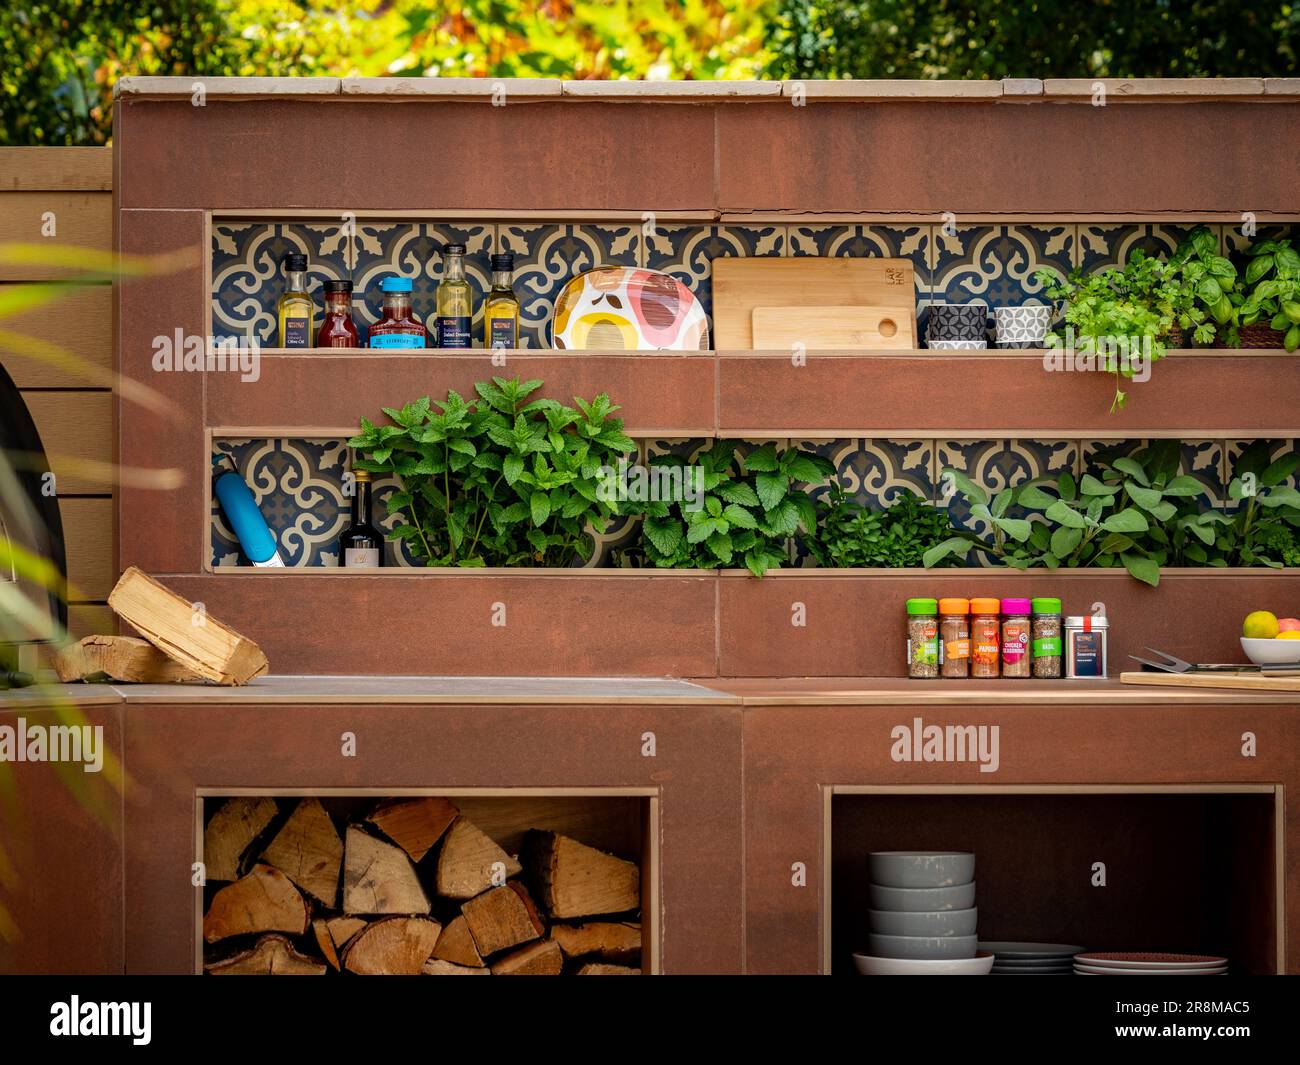 Outdoor kitchen complete with recessed shelves for storage of crockery, bottles of oil, and pots of herbs in a UK garden show Stock Photo